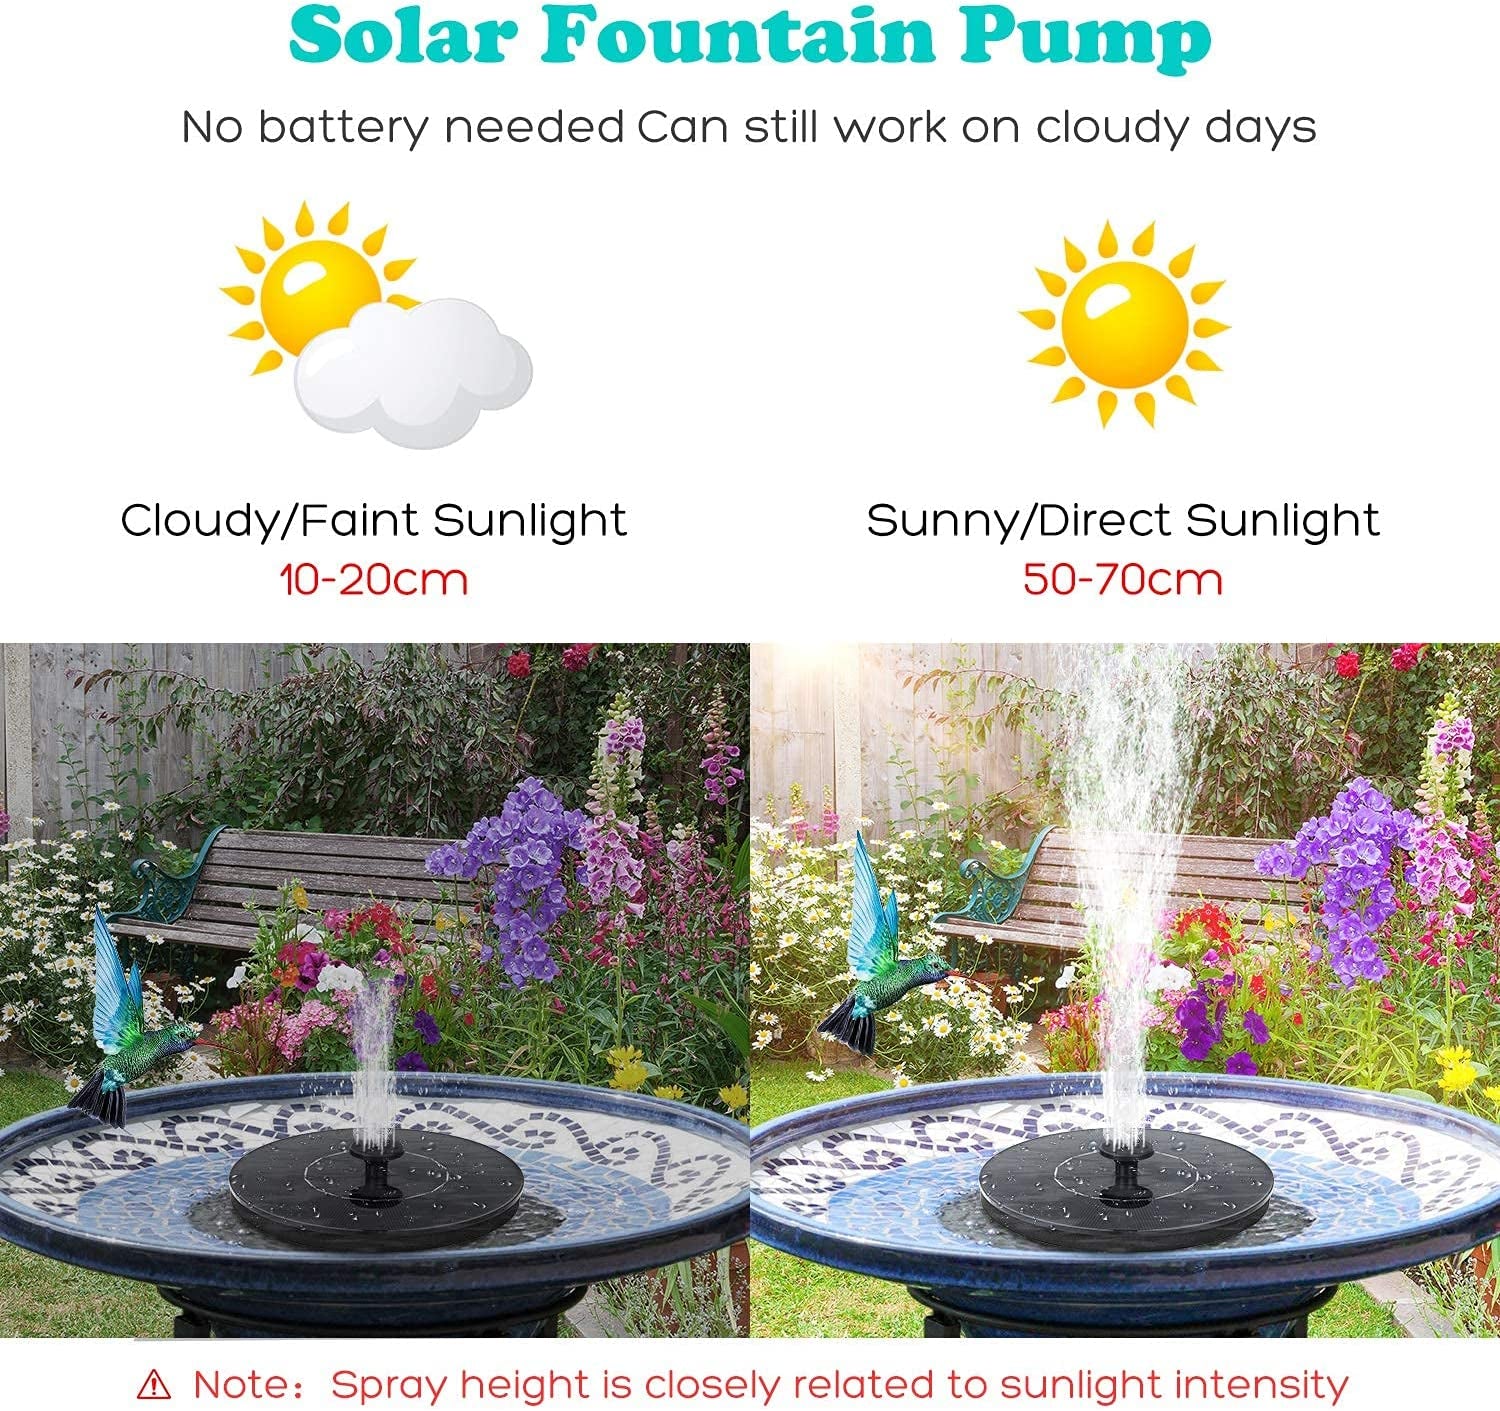 TGAHTMI, Solar Fountain 3.5W Bird Bath Fountain 7 Colors Leds Lights Upgraded Solar Powered Water Fountain Pump with 6 Nozzles for Outdoor, Pond, Pool, Fish Tank, Patio, Garden Decoration